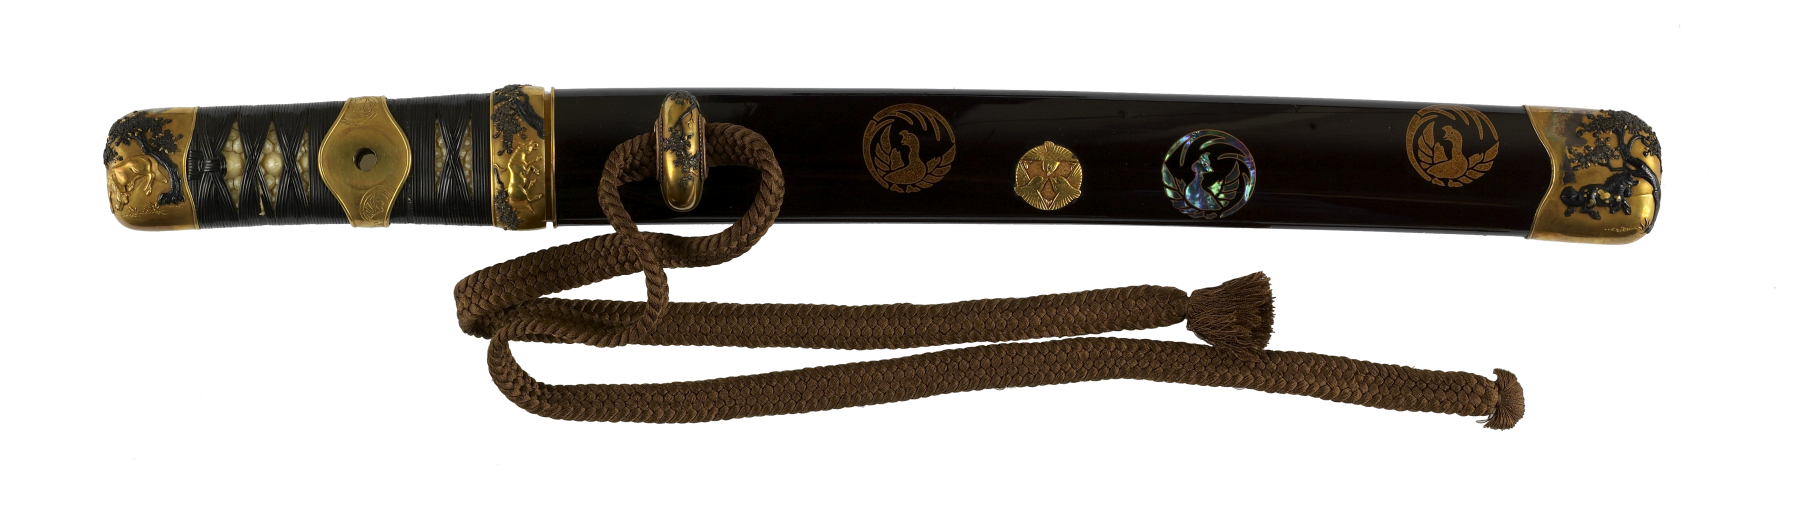 Image for Dagger (aikuchi) with dark brown lacquer saya with phoenix medalion (includes 51.1287.1-51.1287.2)